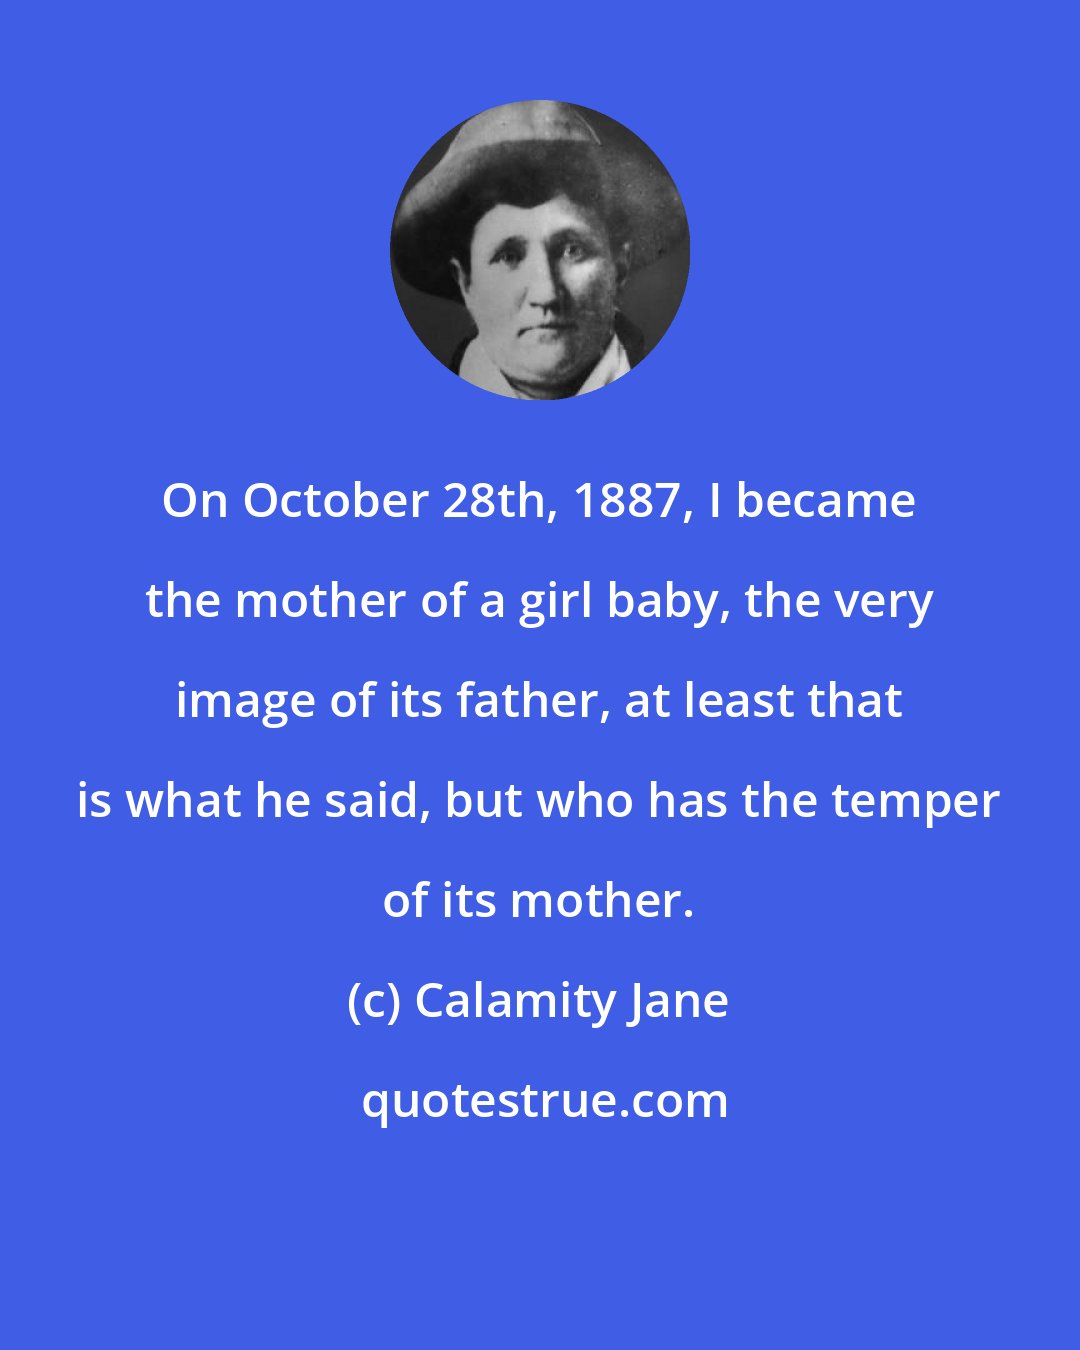 Calamity Jane: On October 28th, 1887, I became the mother of a girl baby, the very image of its father, at least that is what he said, but who has the temper of its mother.